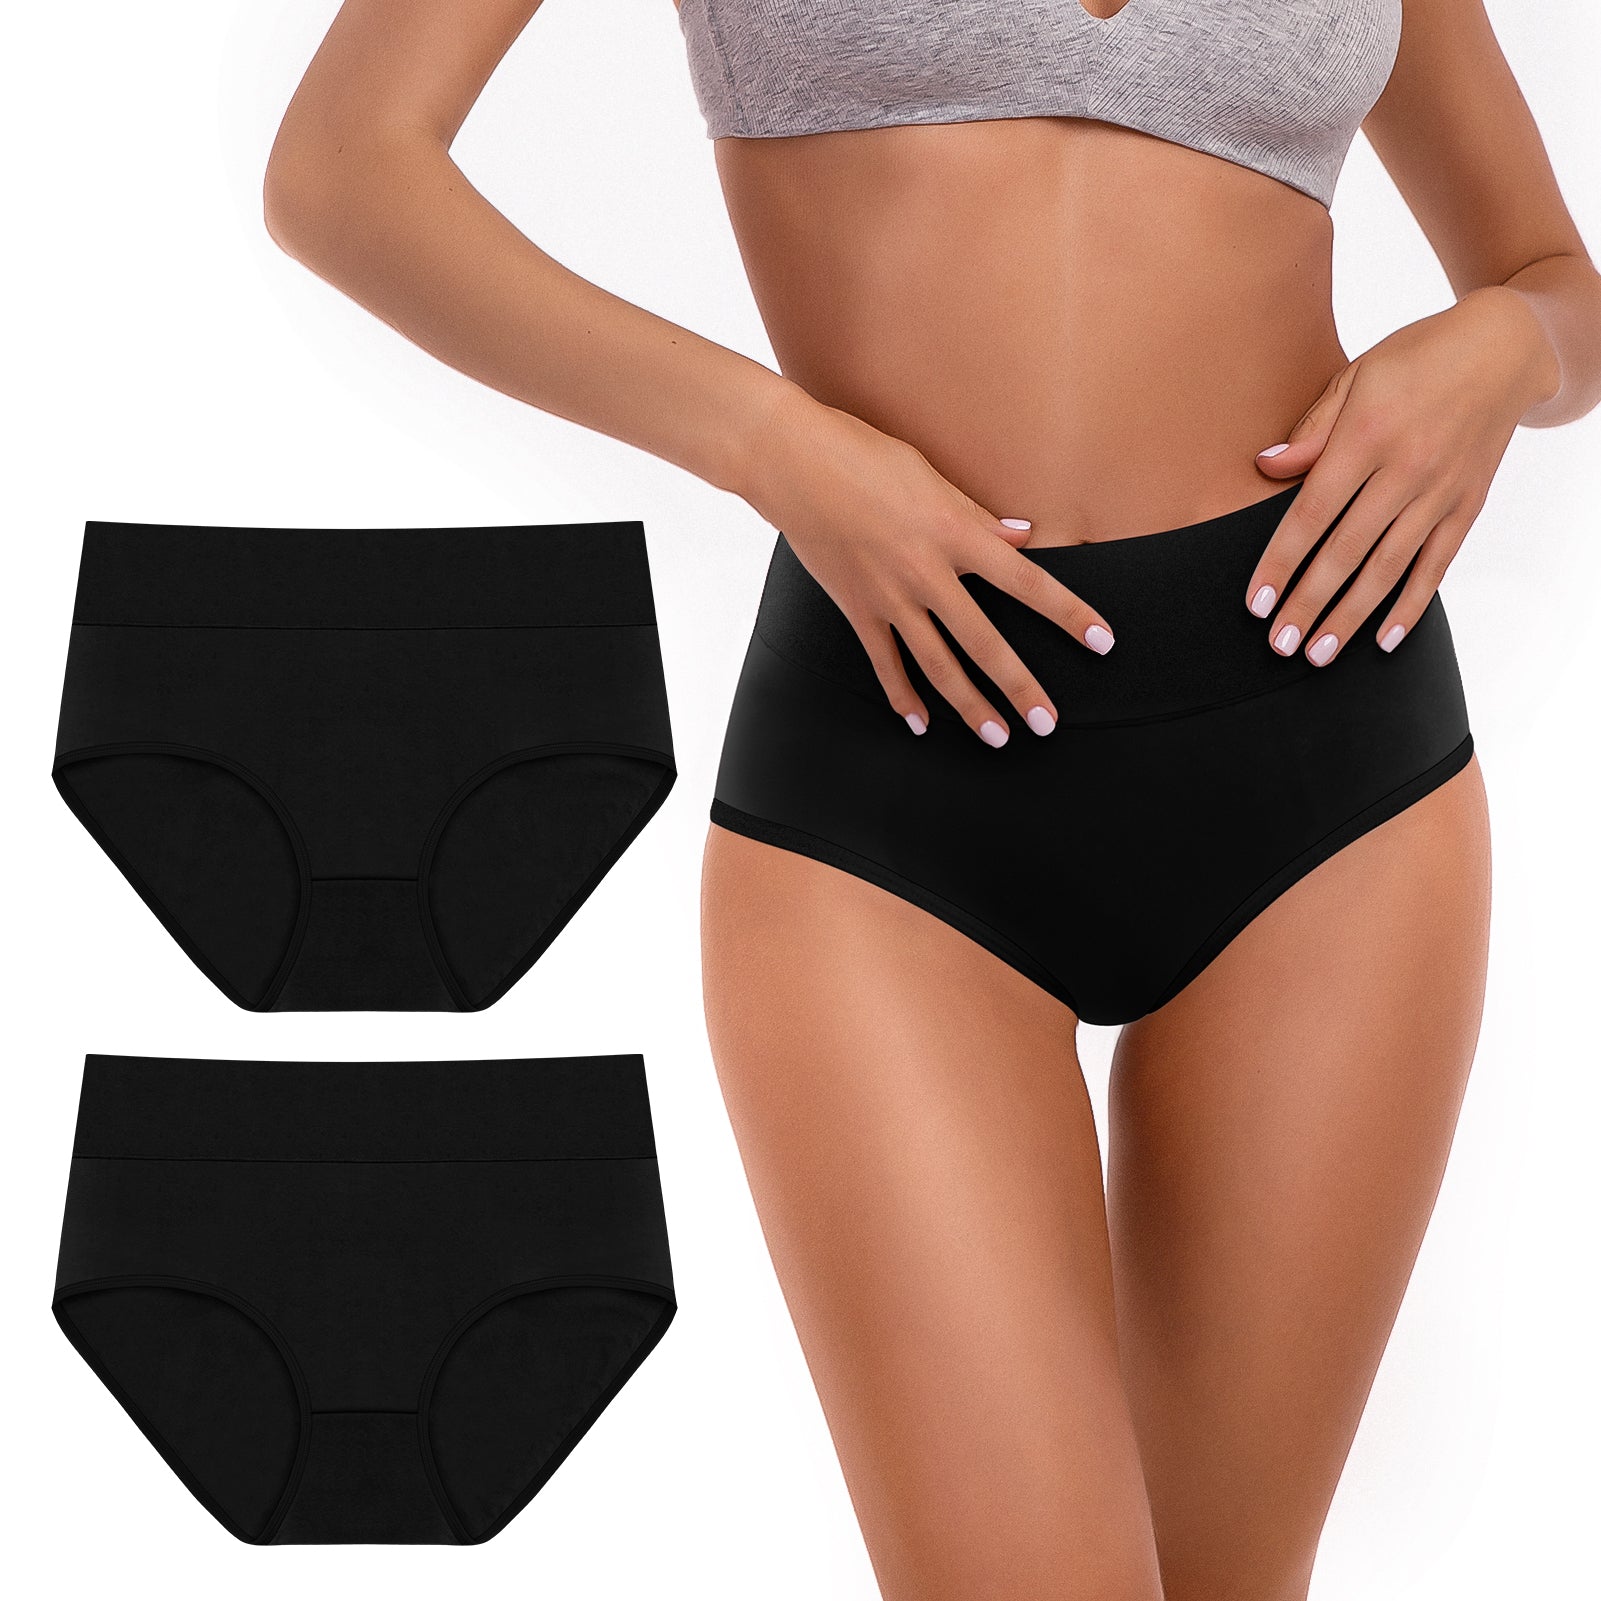 Sinopant Ladies Cotton High Waisted Underwear For Women Solid